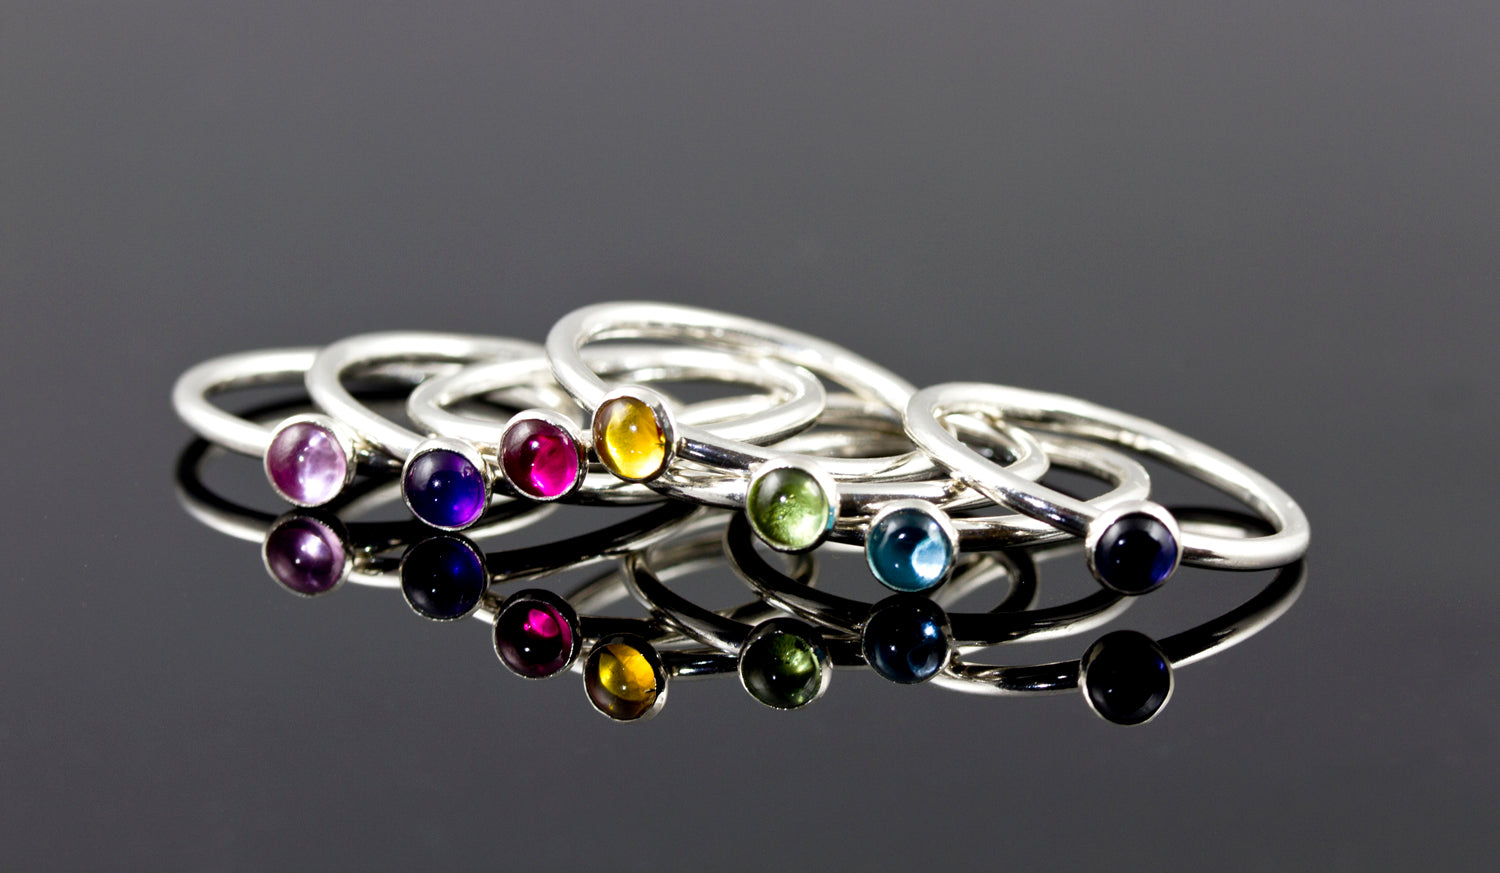 Birthstone stacking rings in sterling silver. Handmade in the US with sustainable silver.